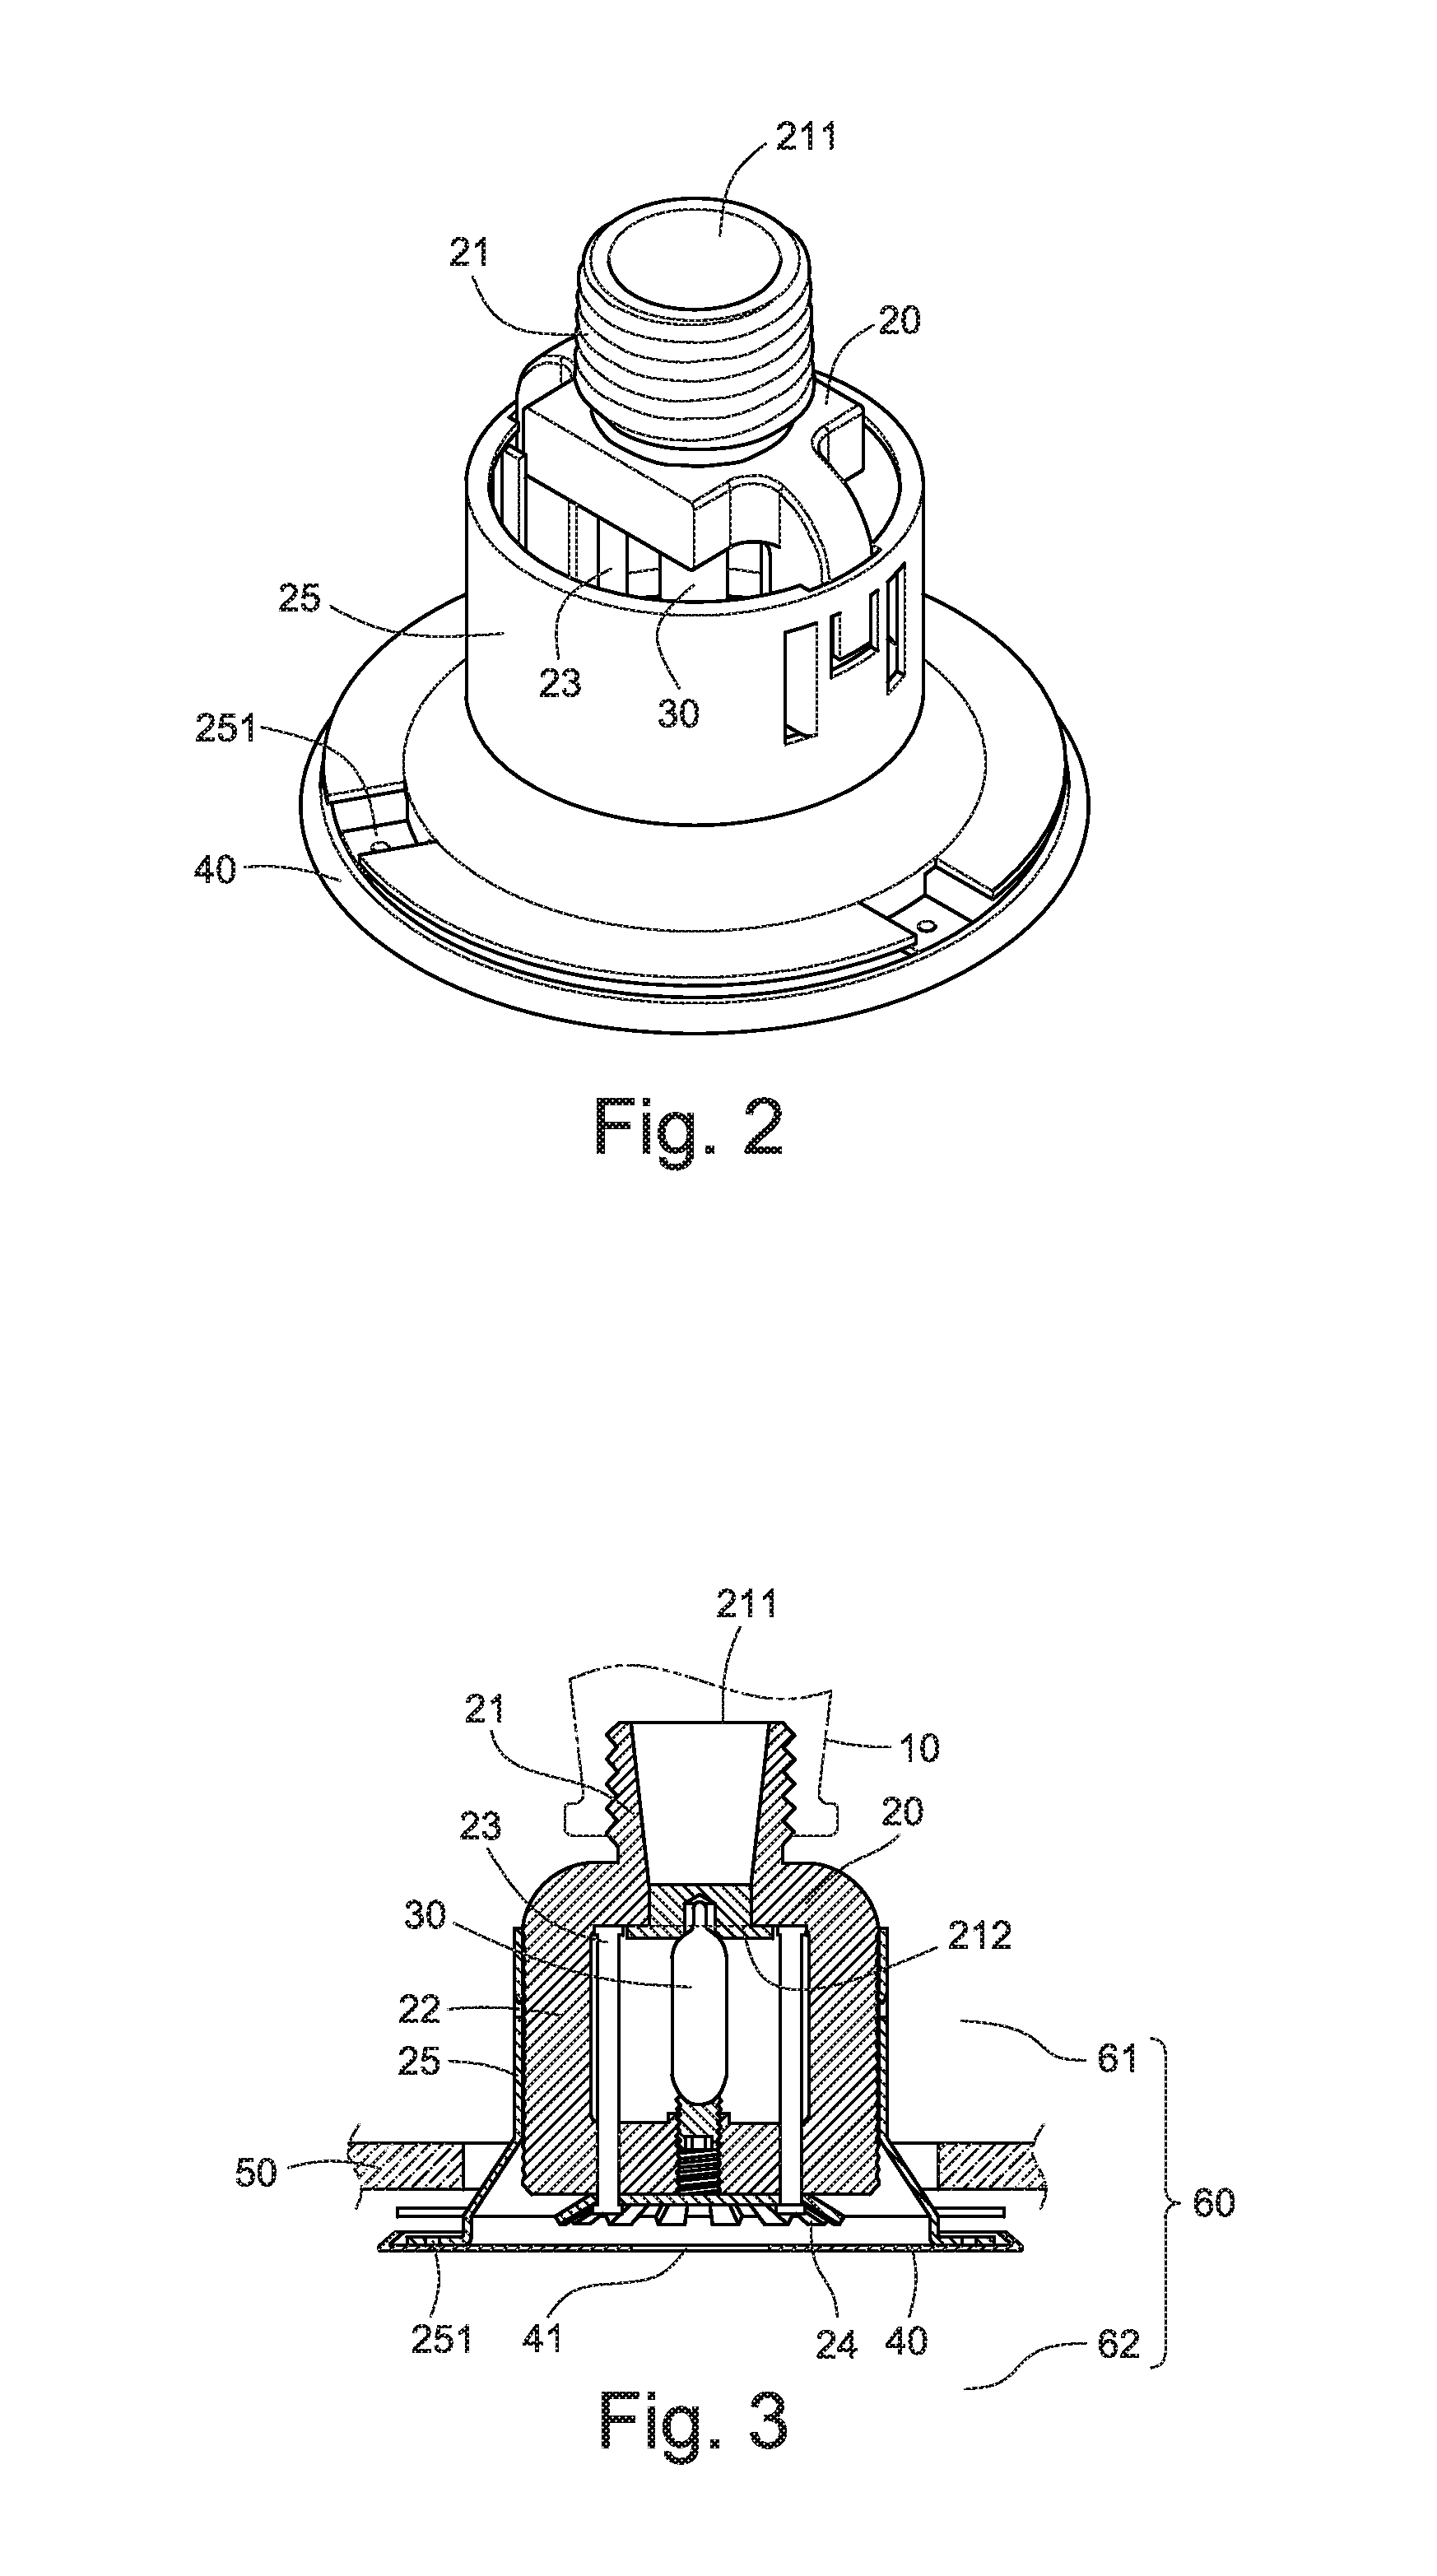 Fire sprinkler capable of detecting a high temperature in a short time